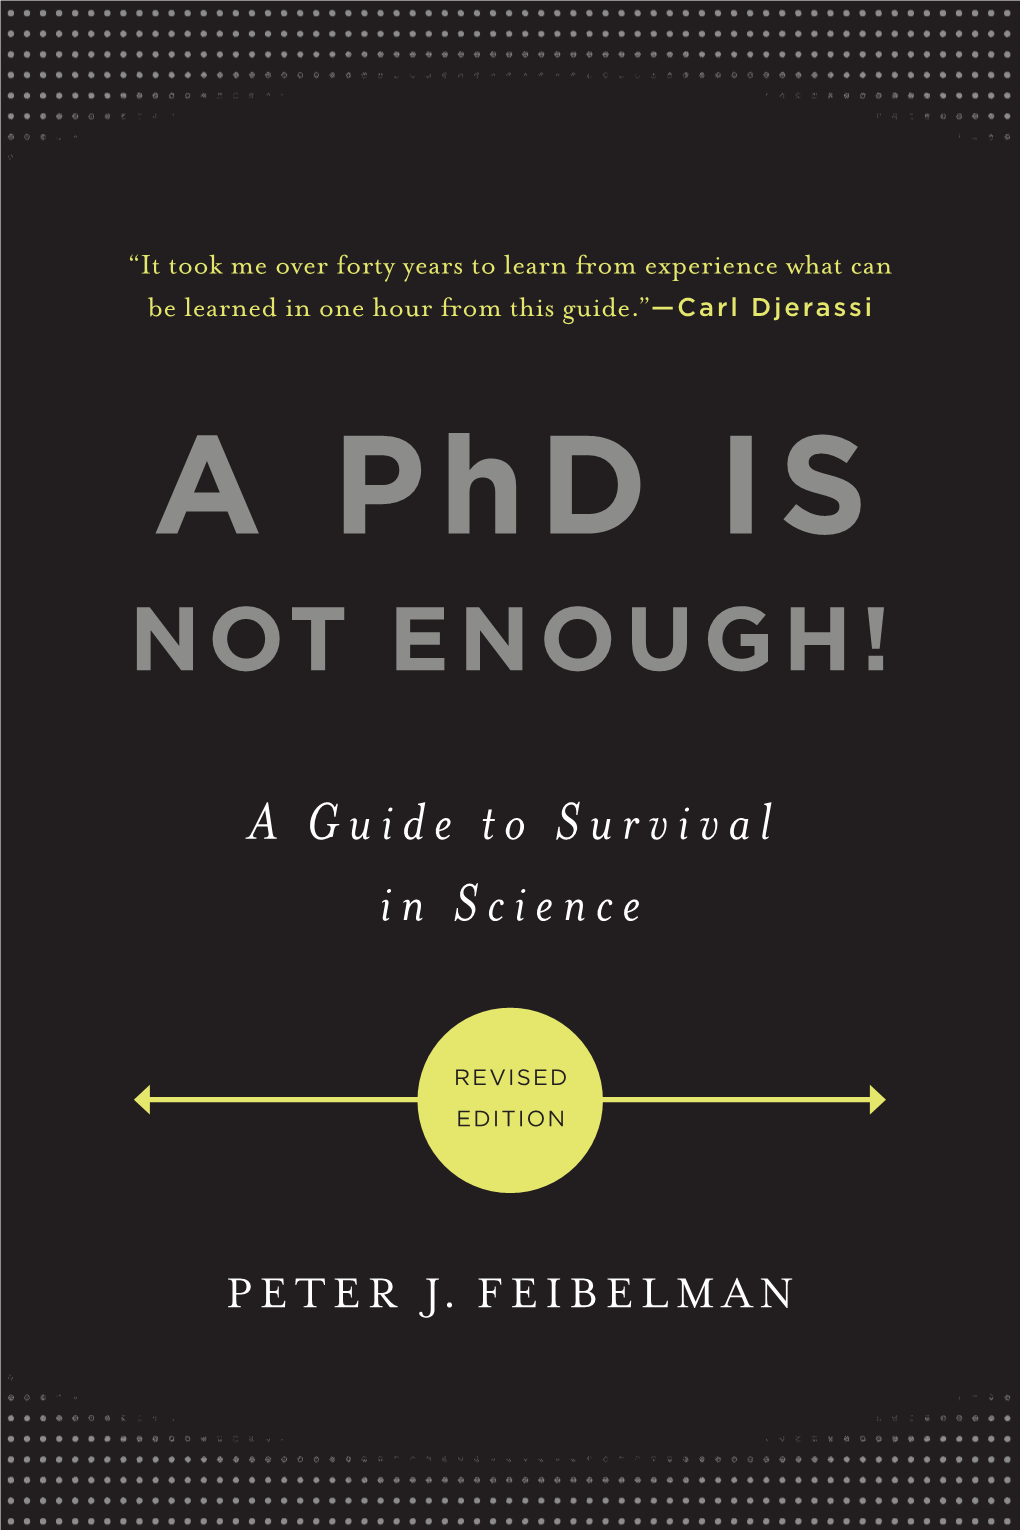 A Phd Is Not Enough!, Physicist Peter J